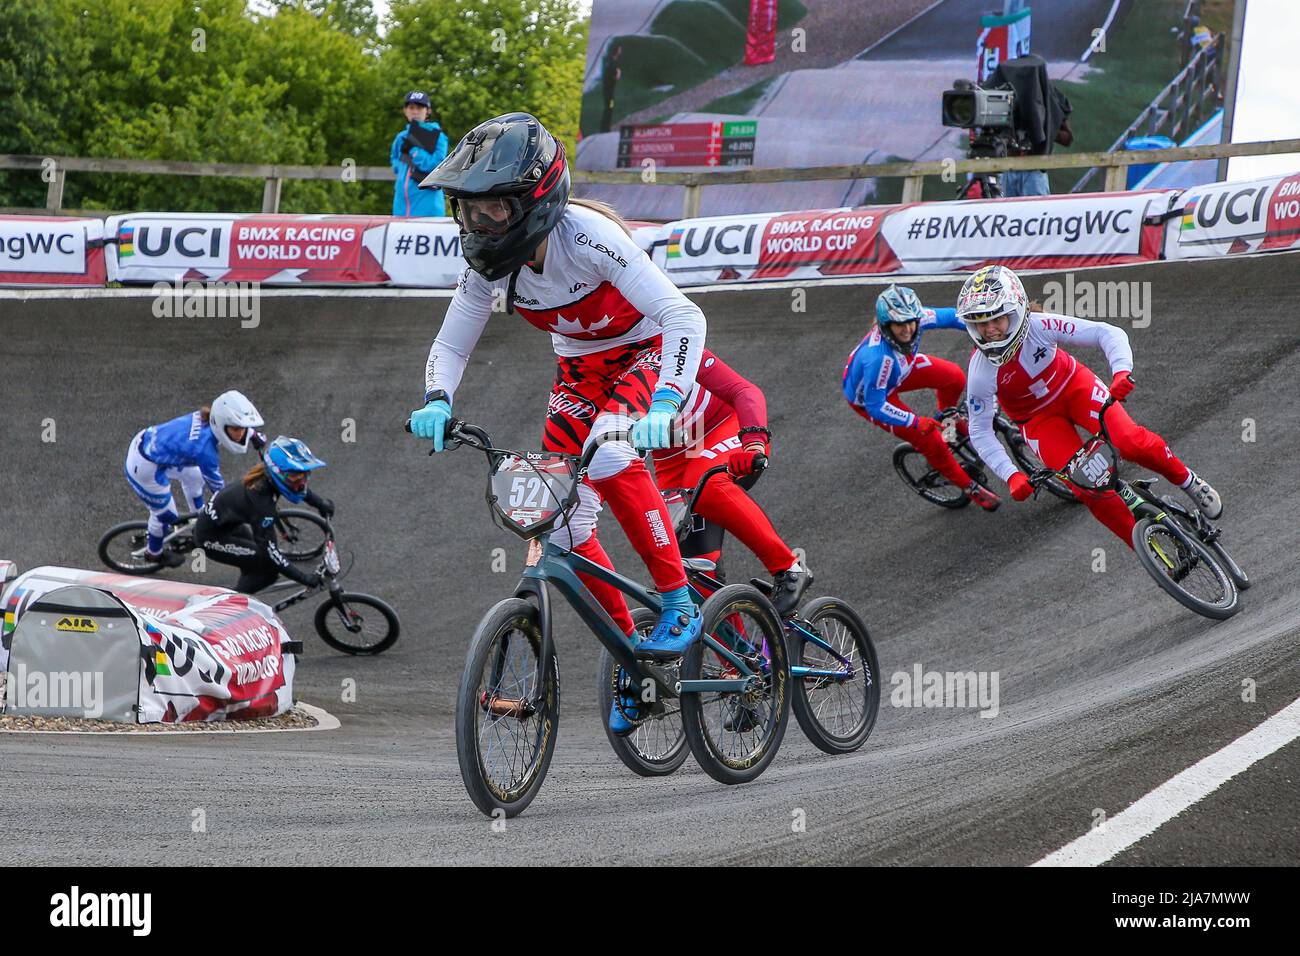 Glasgow, UK. 28th May, 2022. The world BMX Racing world cup took place at  the BMX track in Glasgow, Scotland, UK and attracted an international list  of over 200 competitors from across